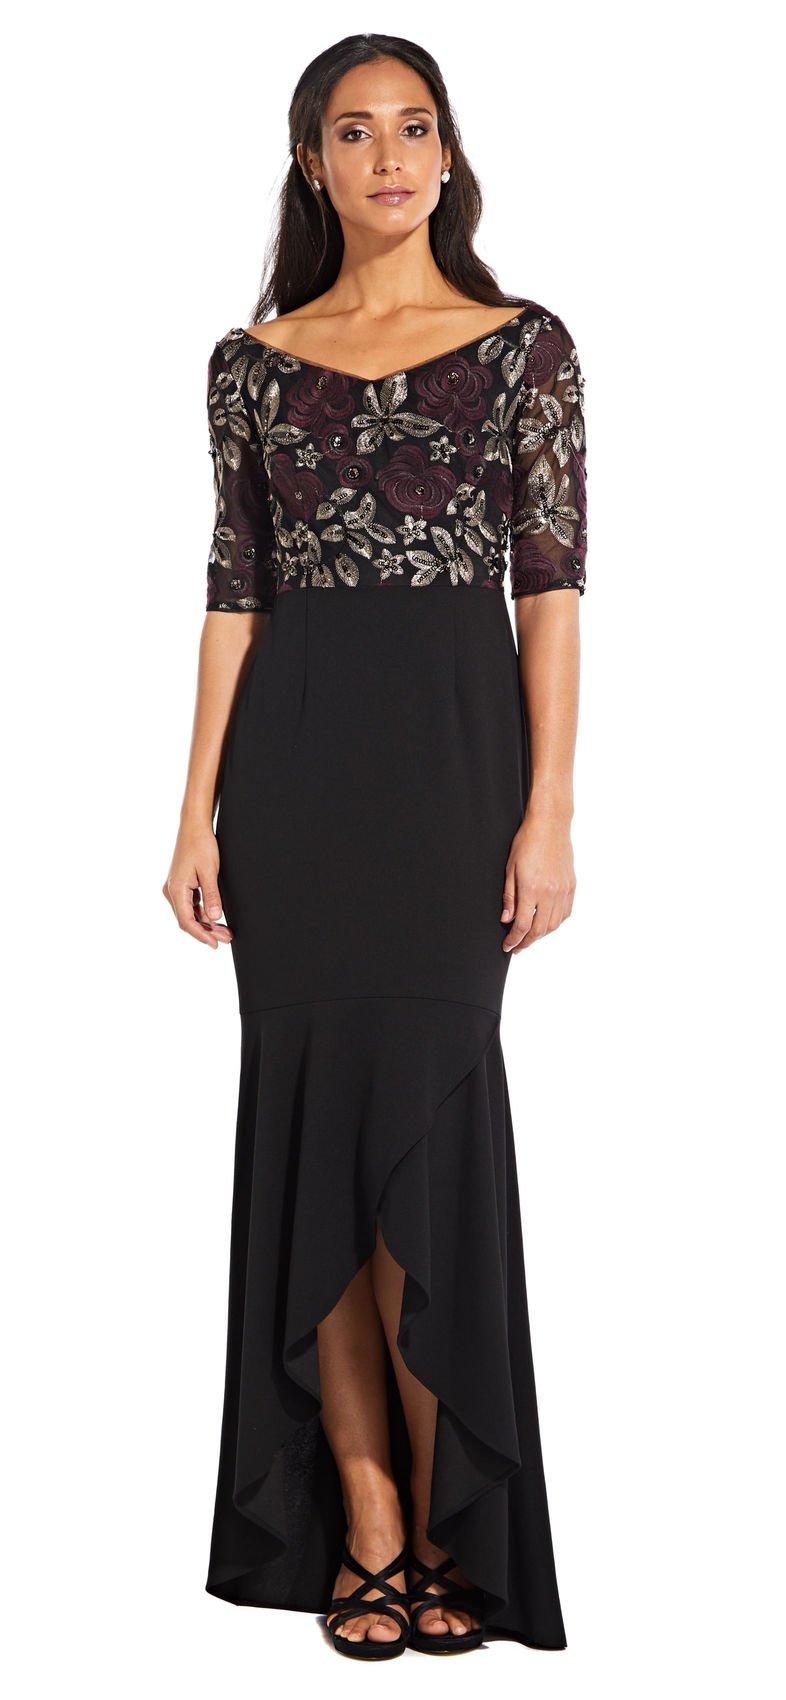 Adrianna Papell - AP1E204611 Floral V-Neck High Low Dress In Purple and Black